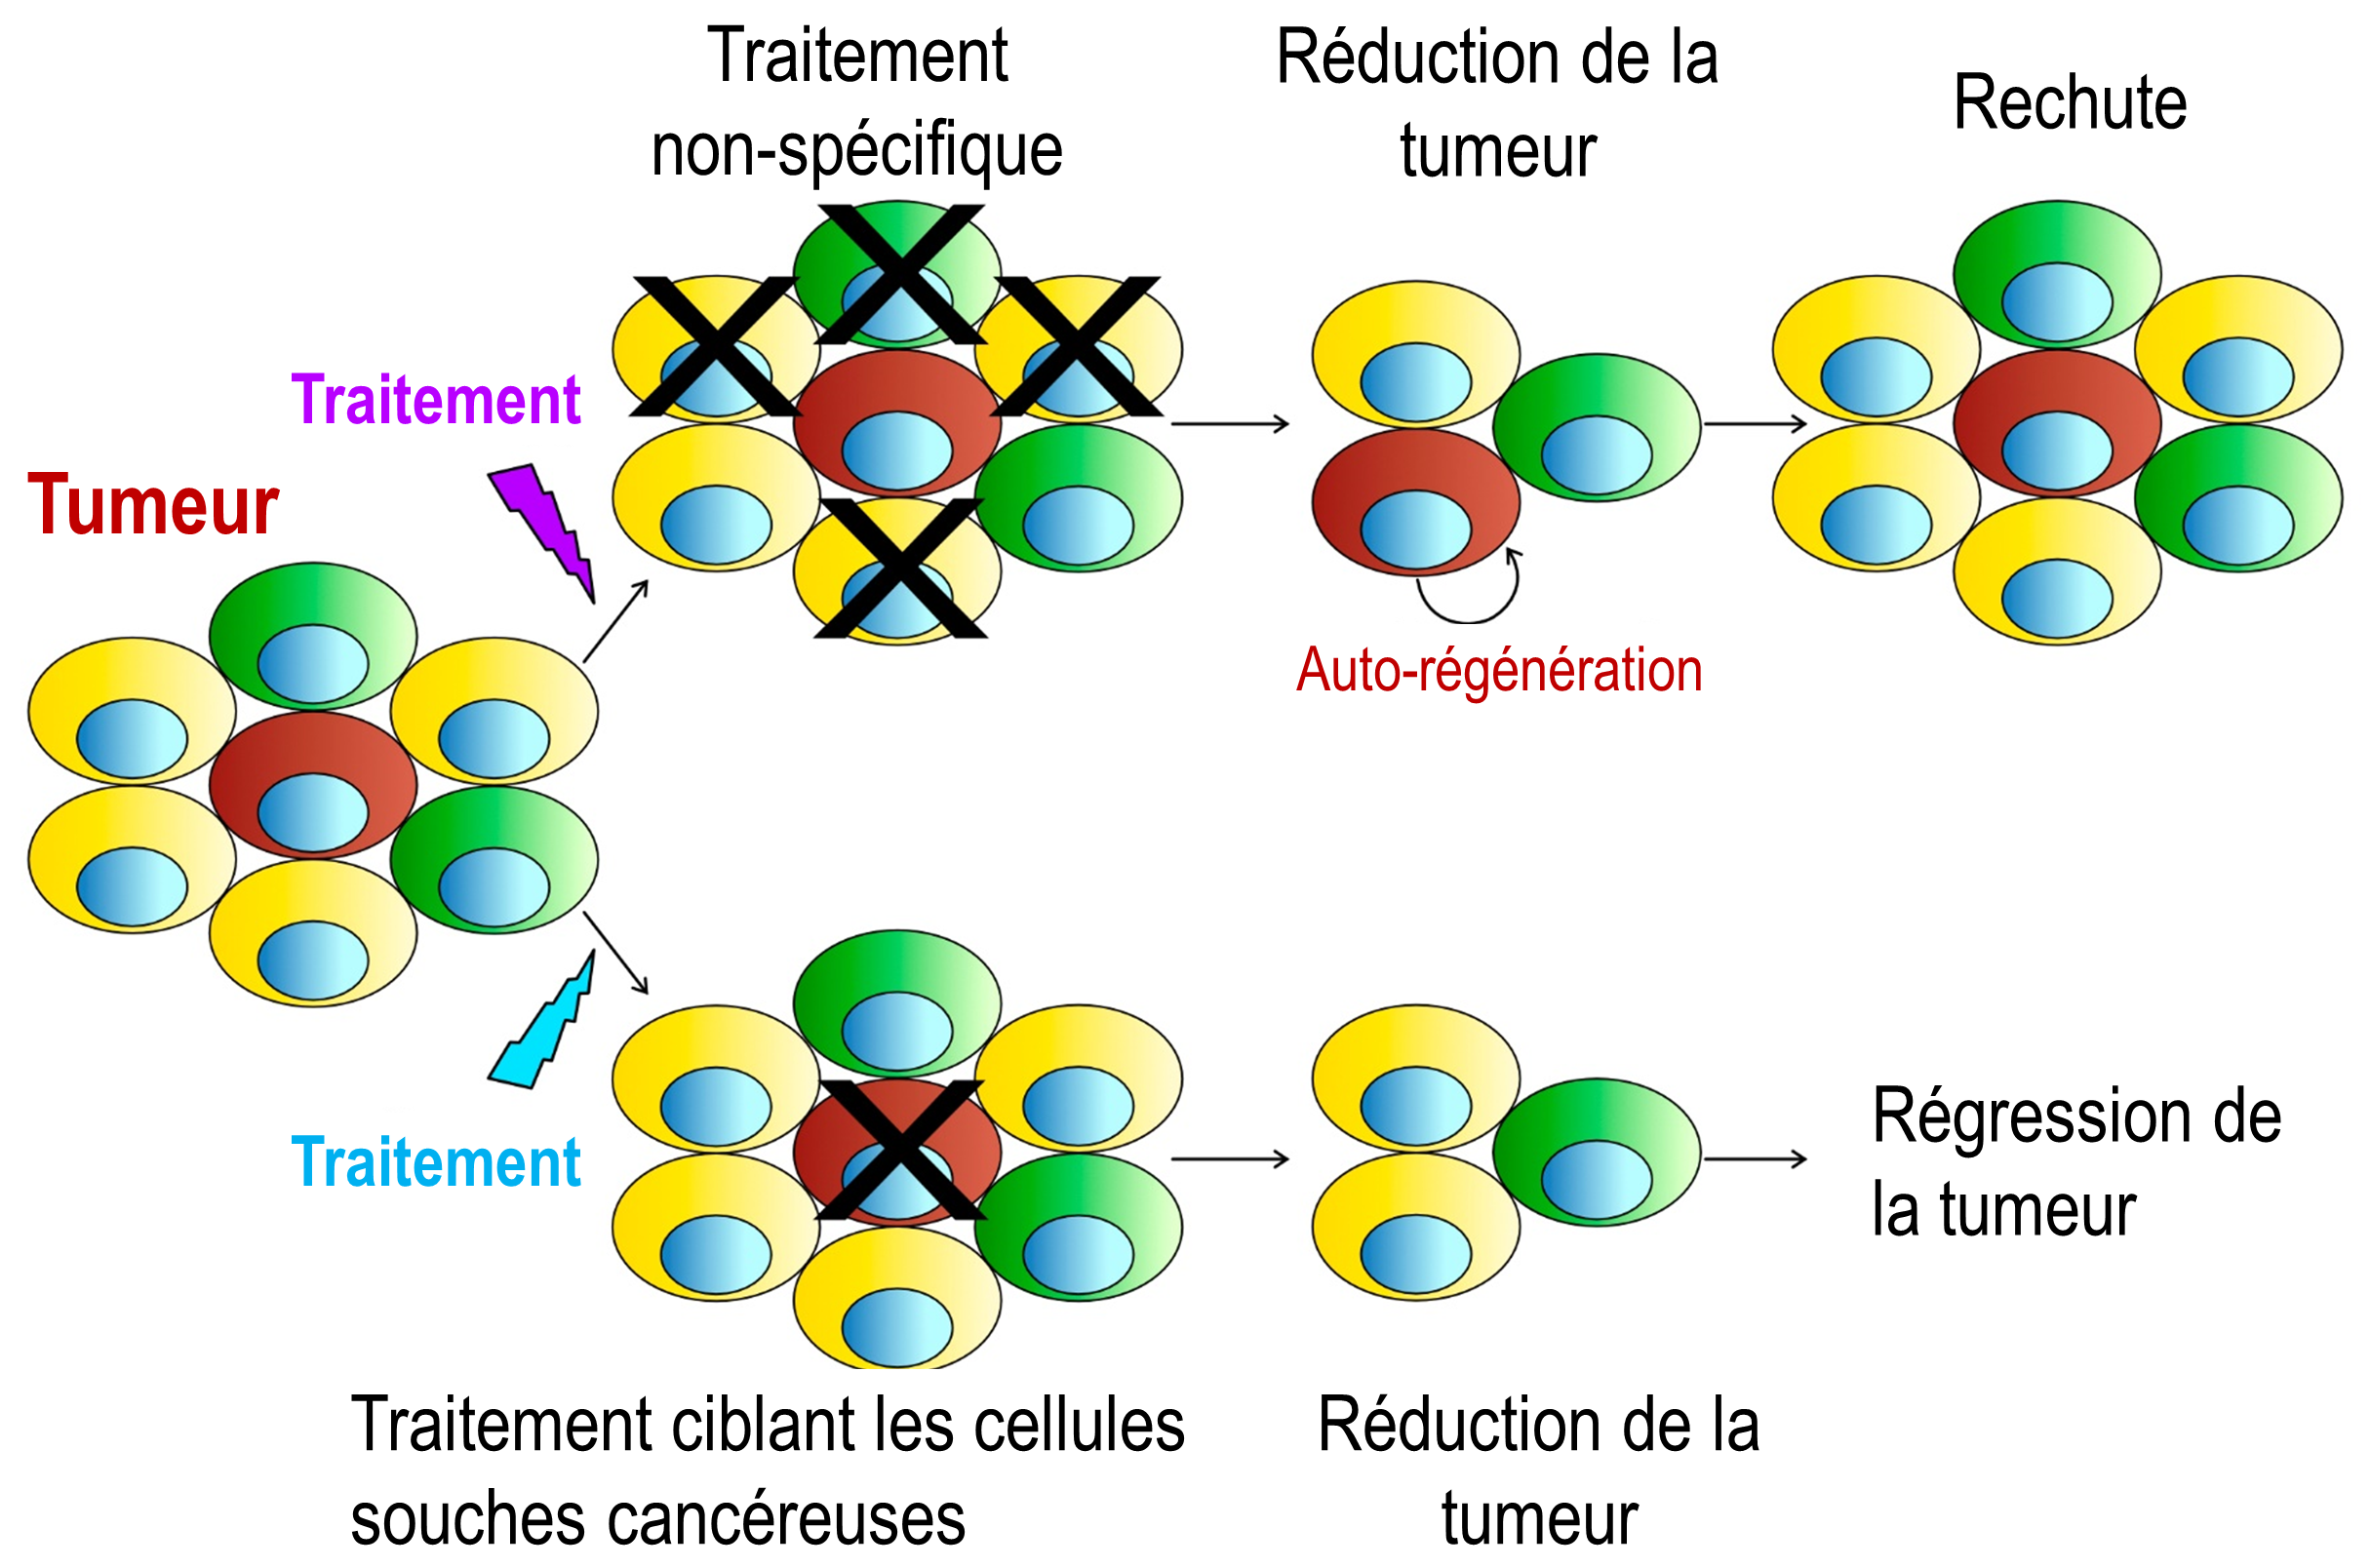 Cancer cell division and growth inhibition.